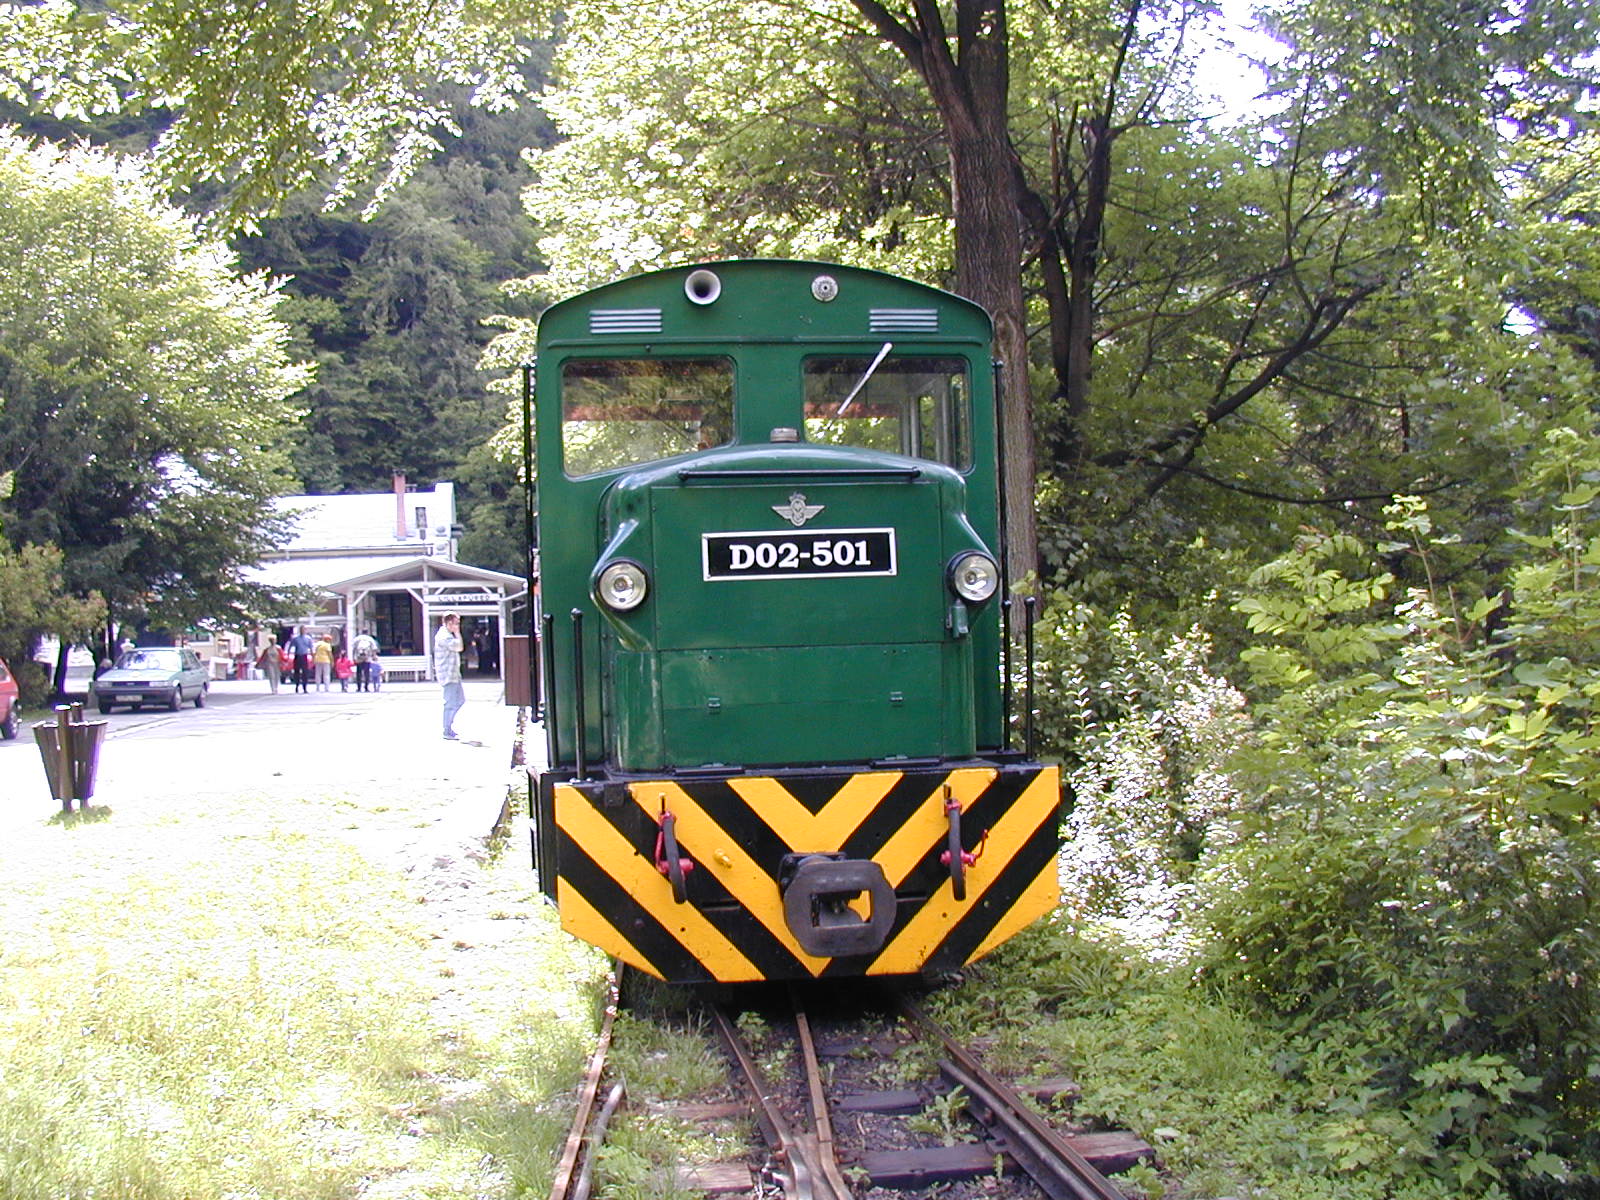 the green train is parked at the station